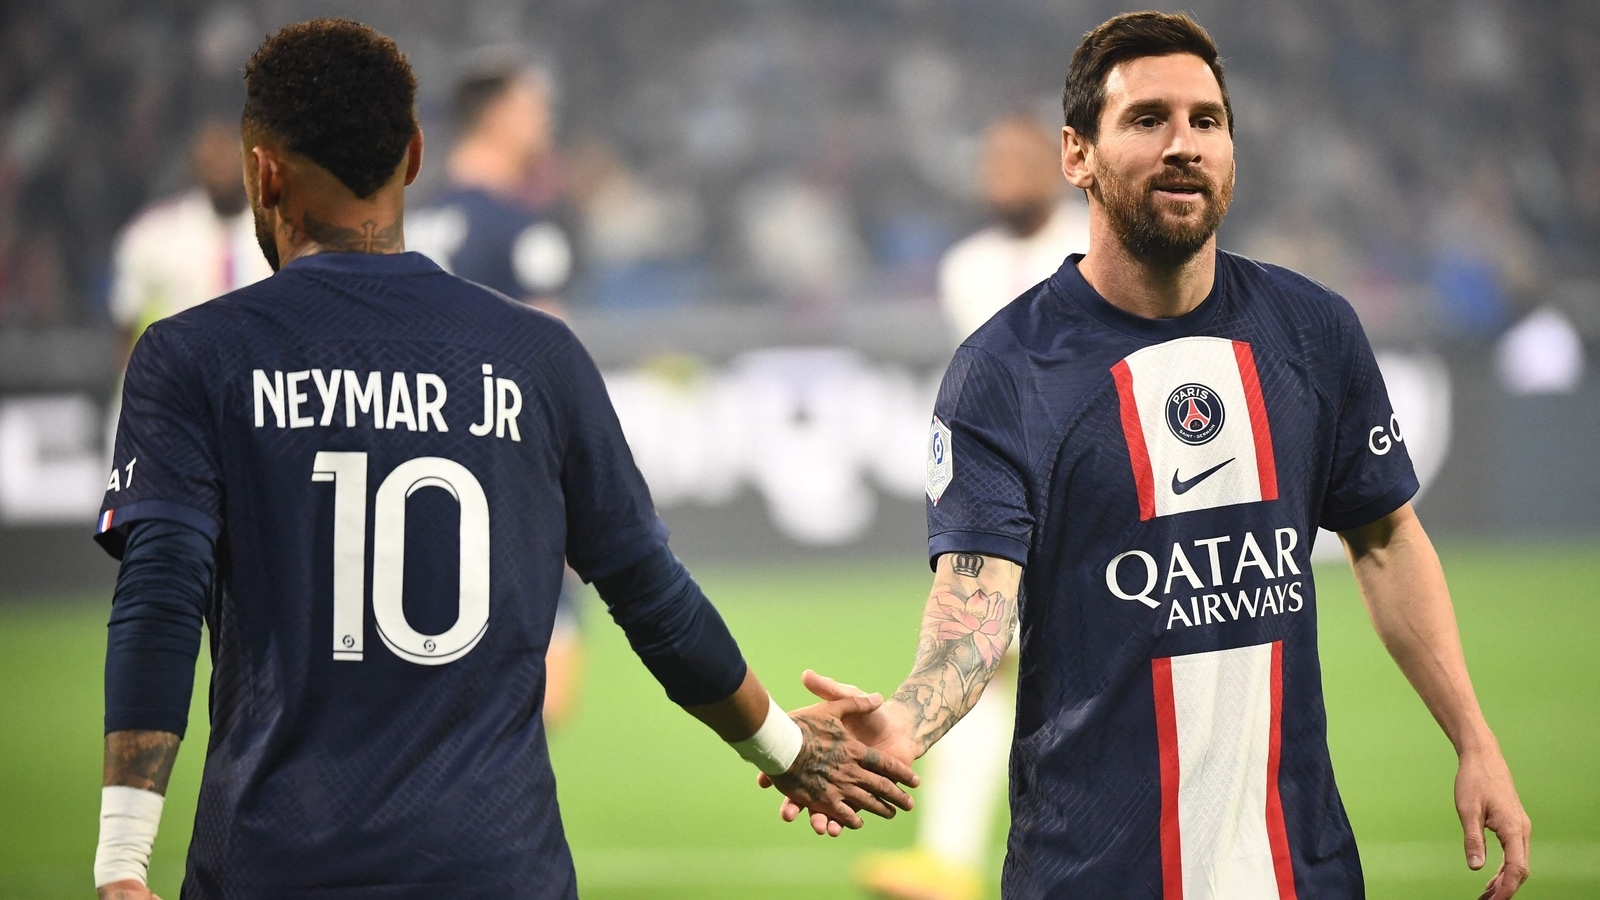 Lionel Messi scores from Neymar assist as PSG beat Lyon | Football ...